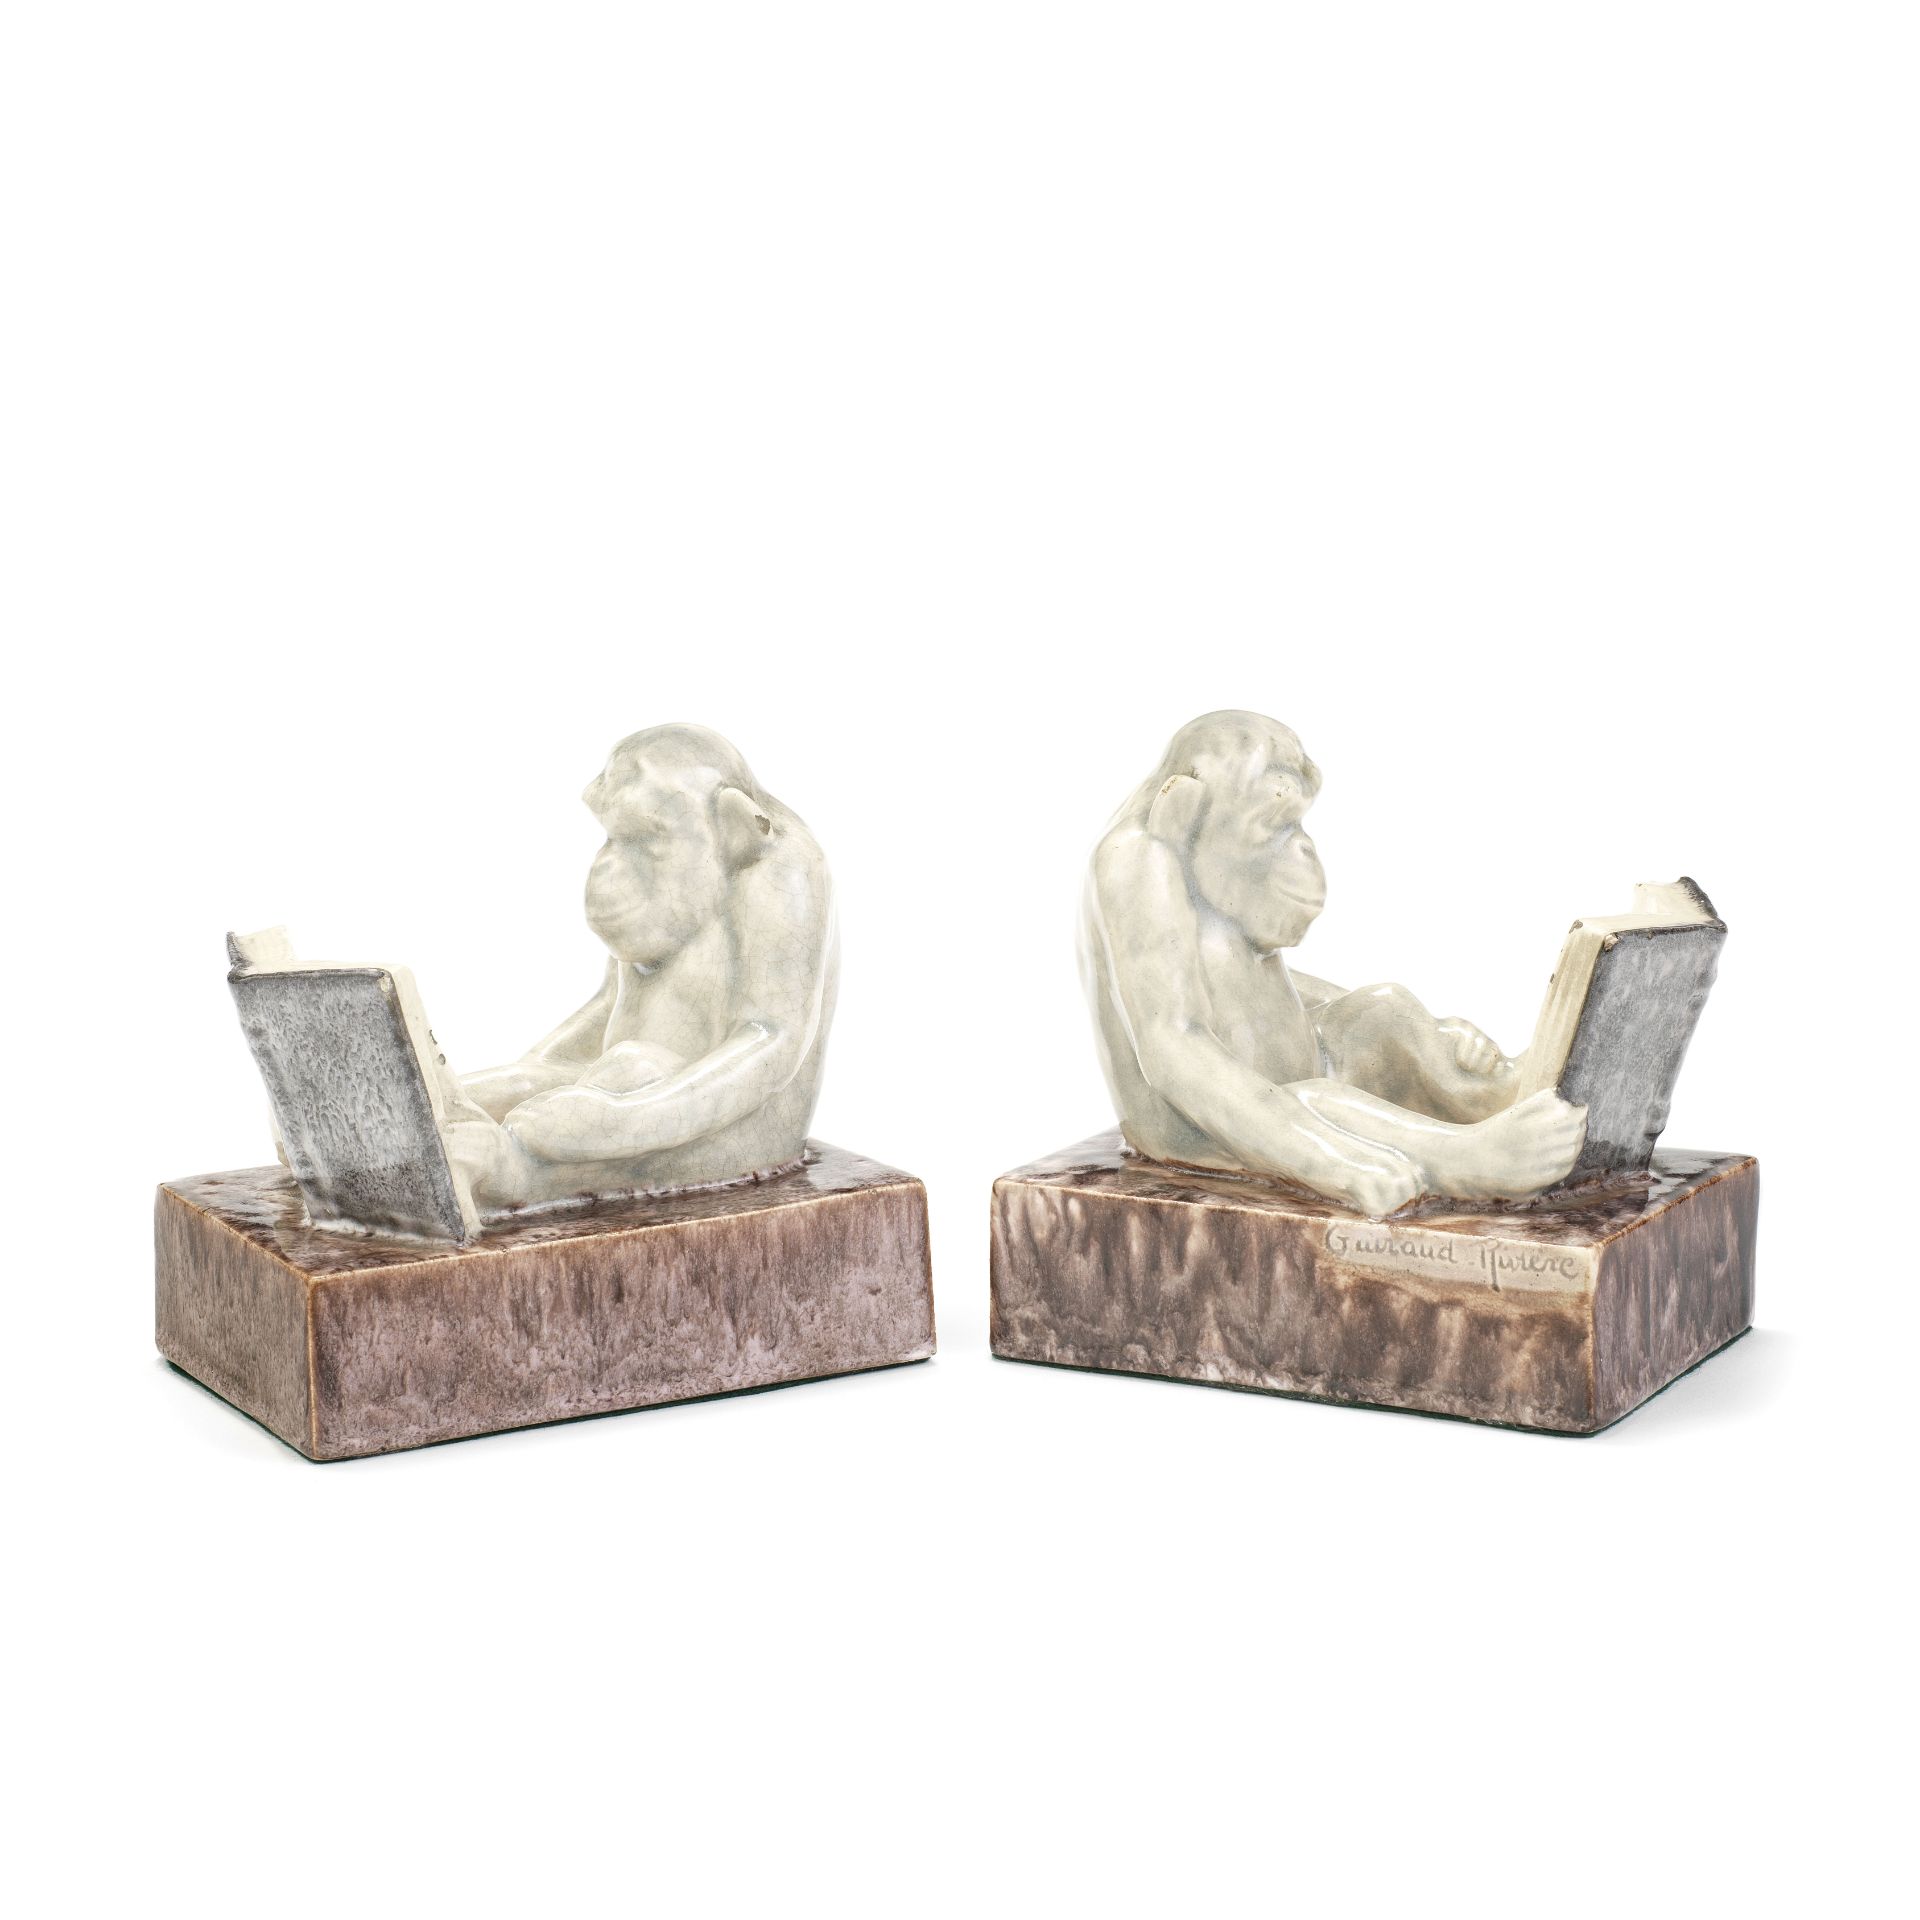 Maurice Guiraud-Rivi&#232;re Pair of 'Monkey' bookends, circa 1925